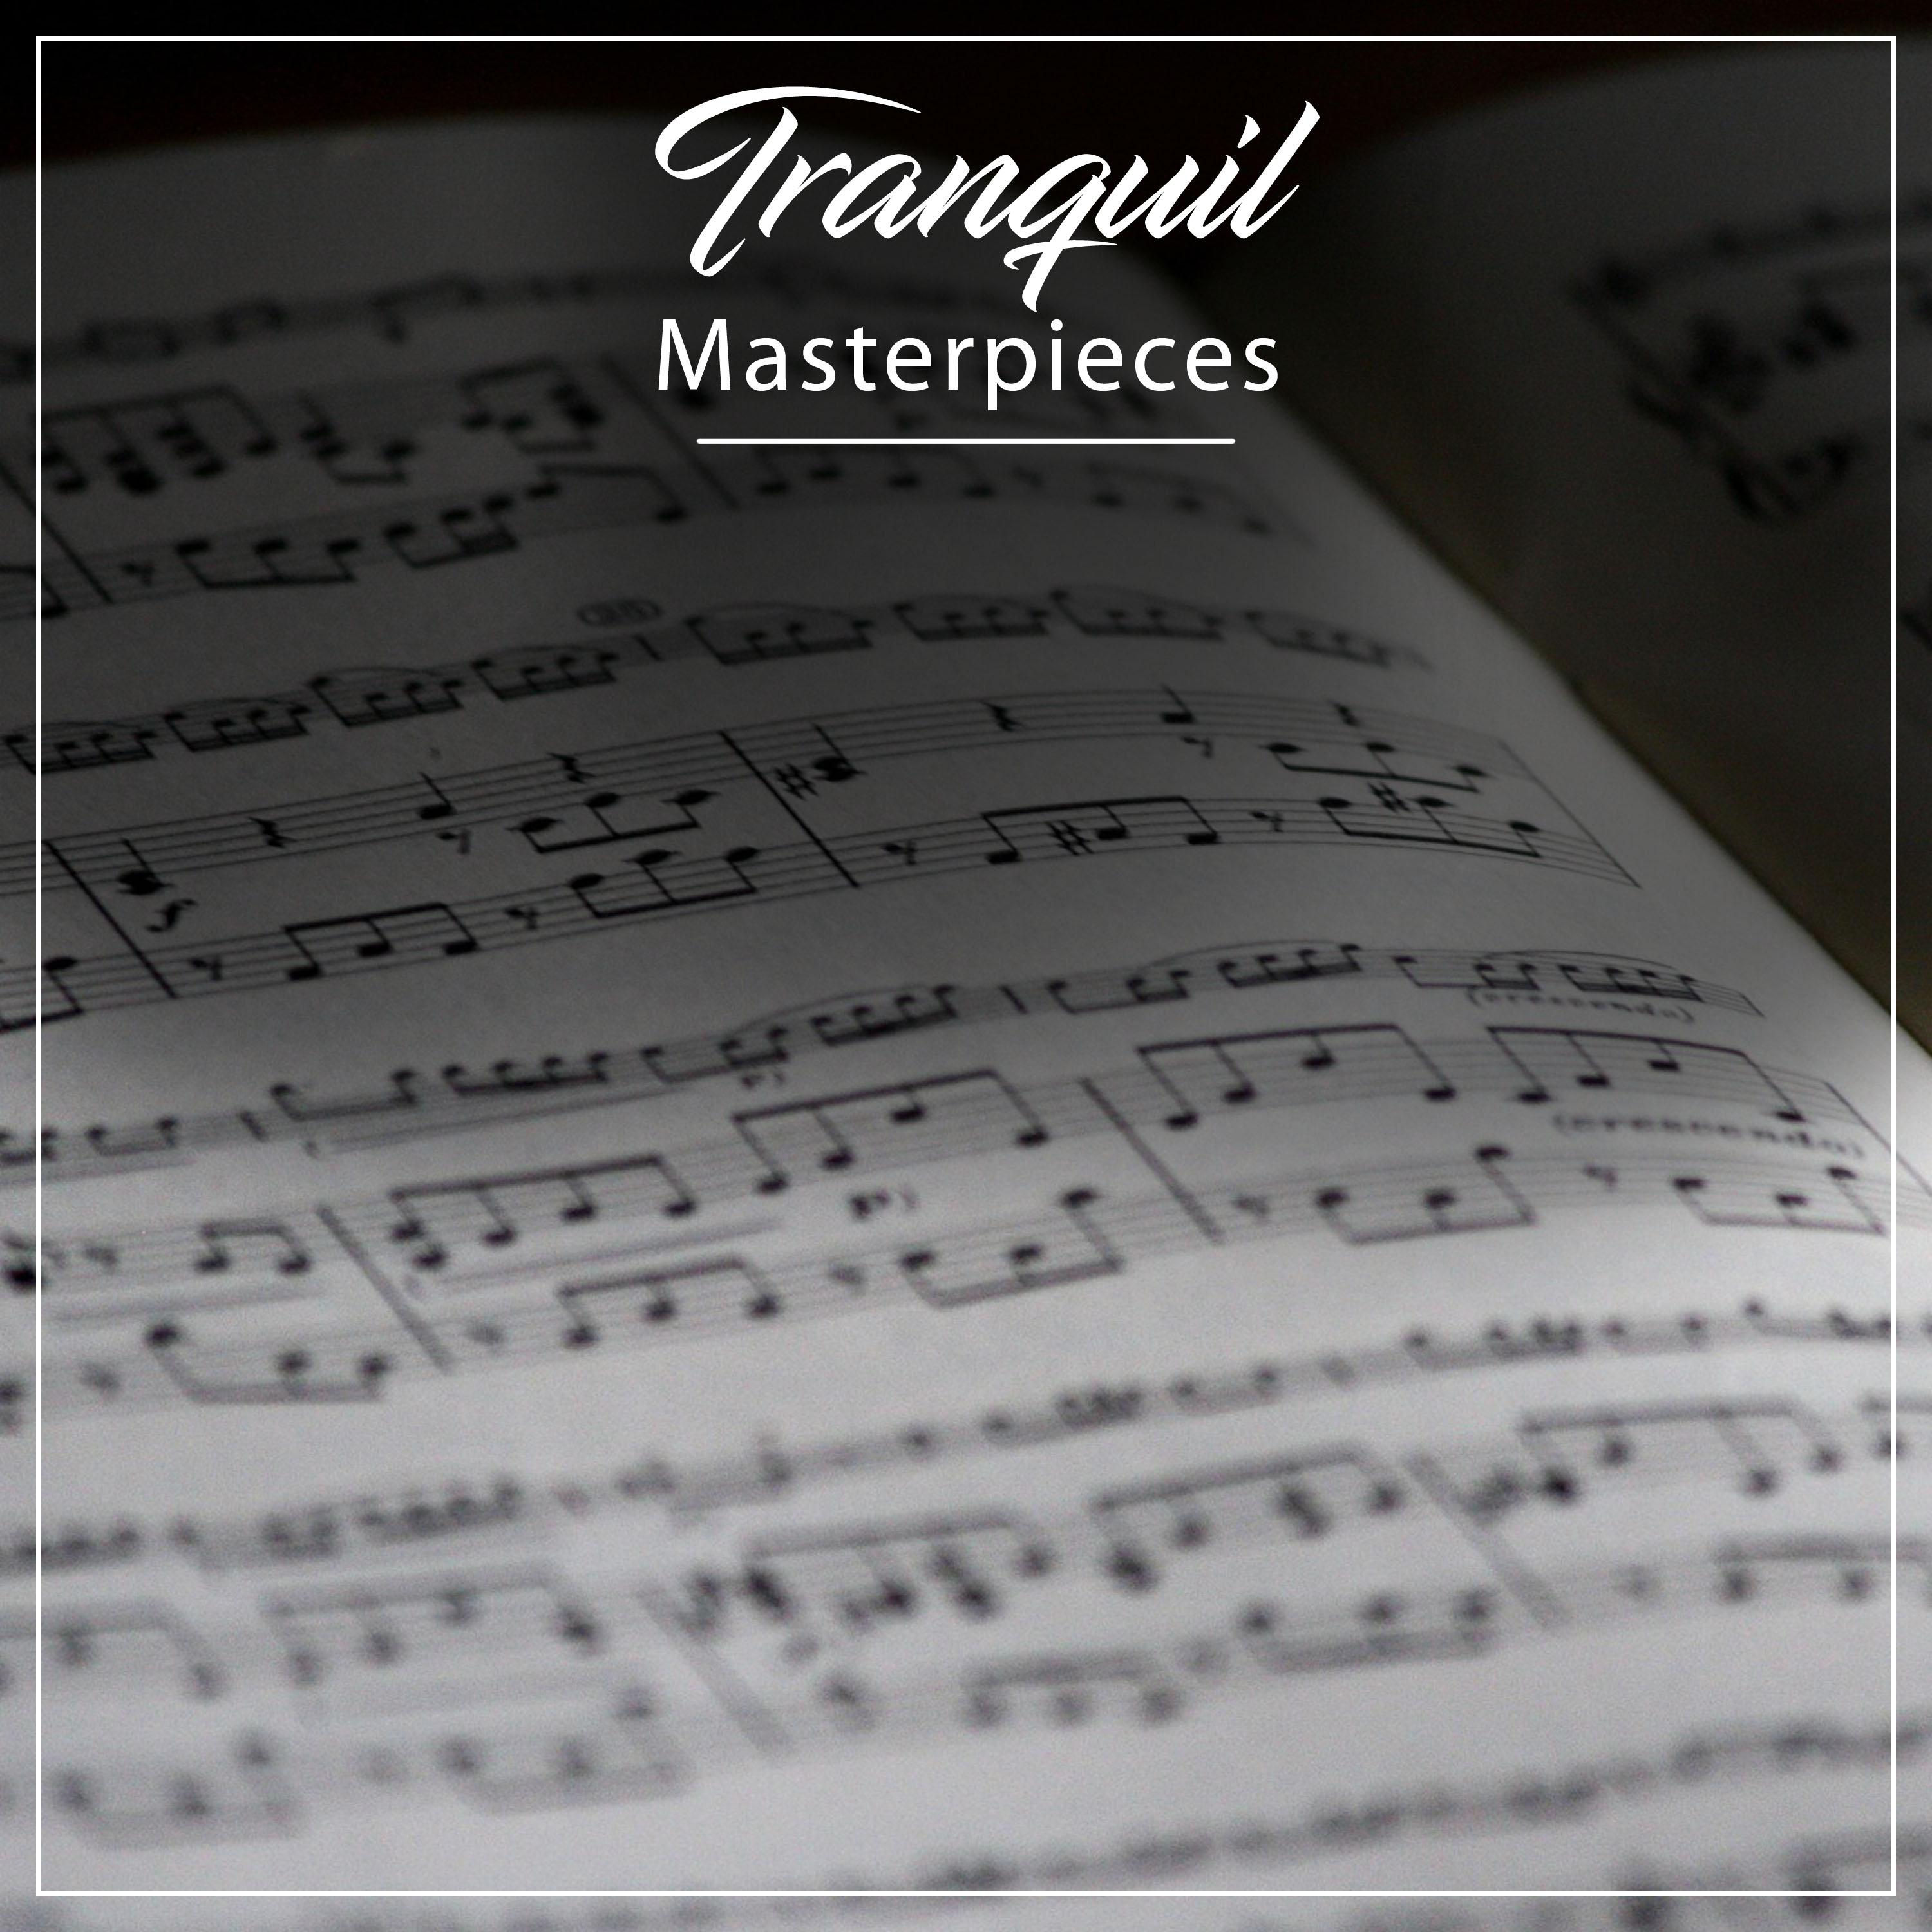 #13 Tranquil Masterpieces